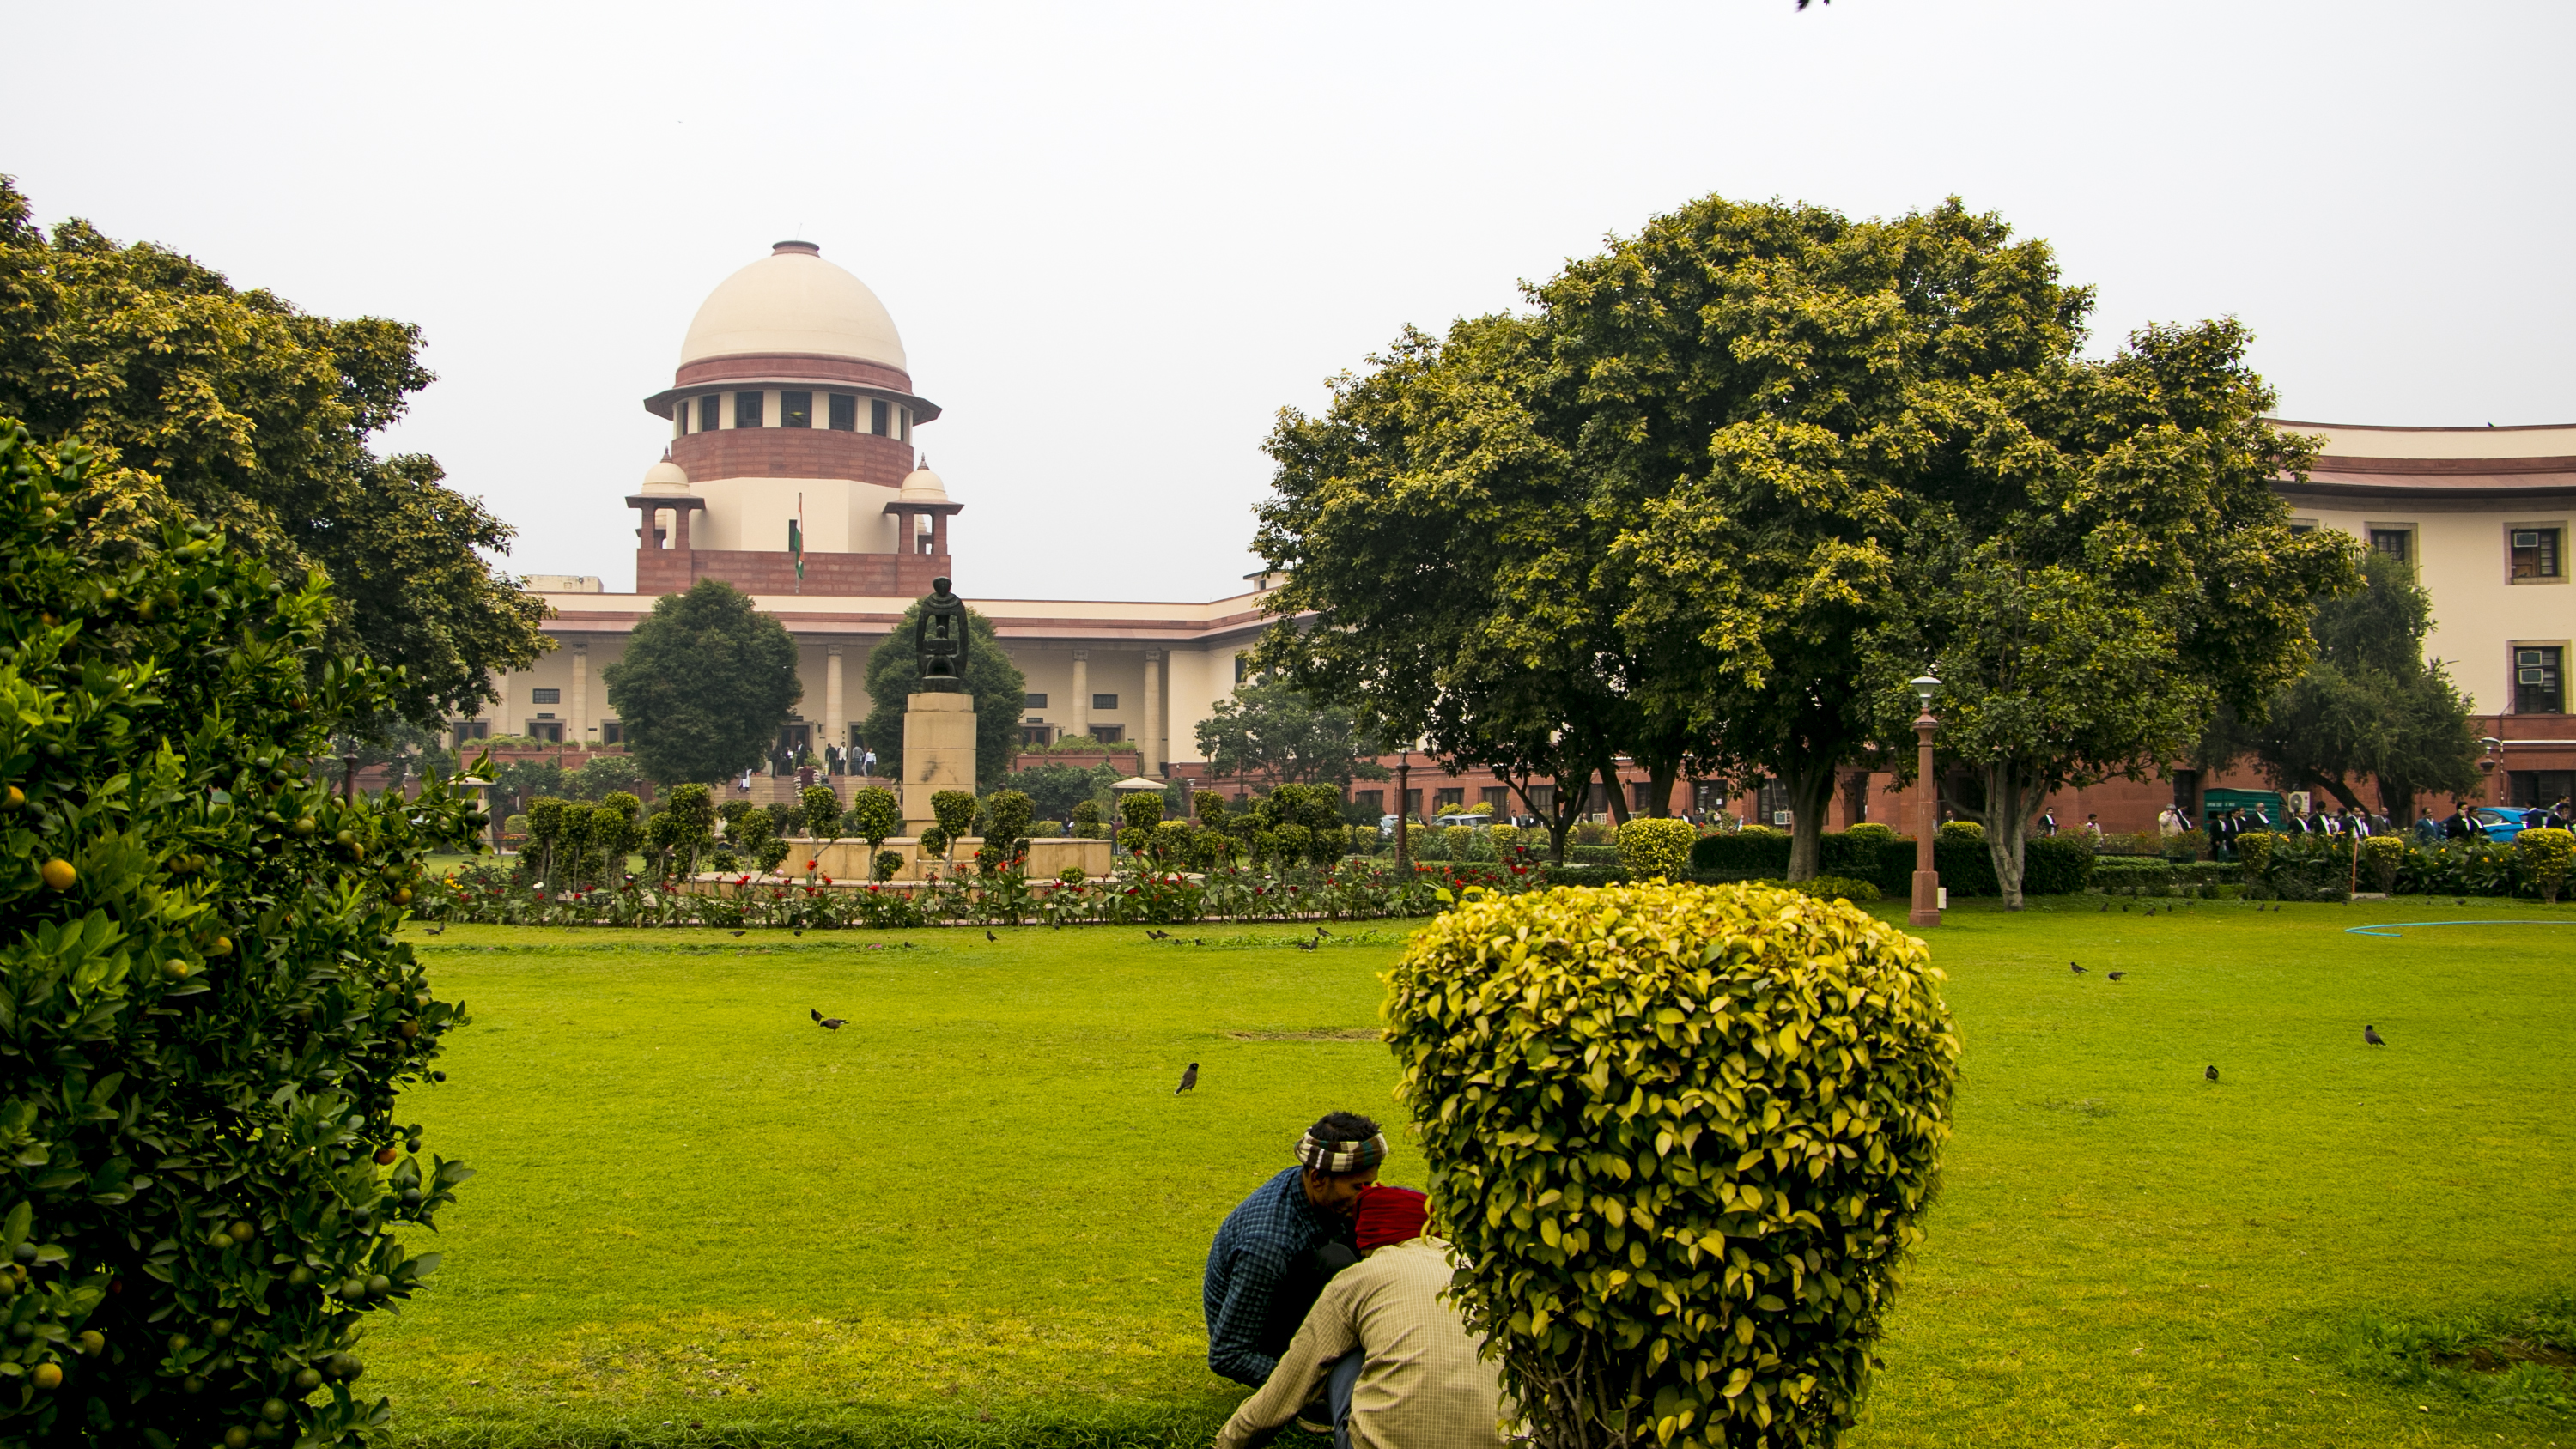 Sedition Law in India – Is a Possible End to an Era of Misuse Around the Corner?